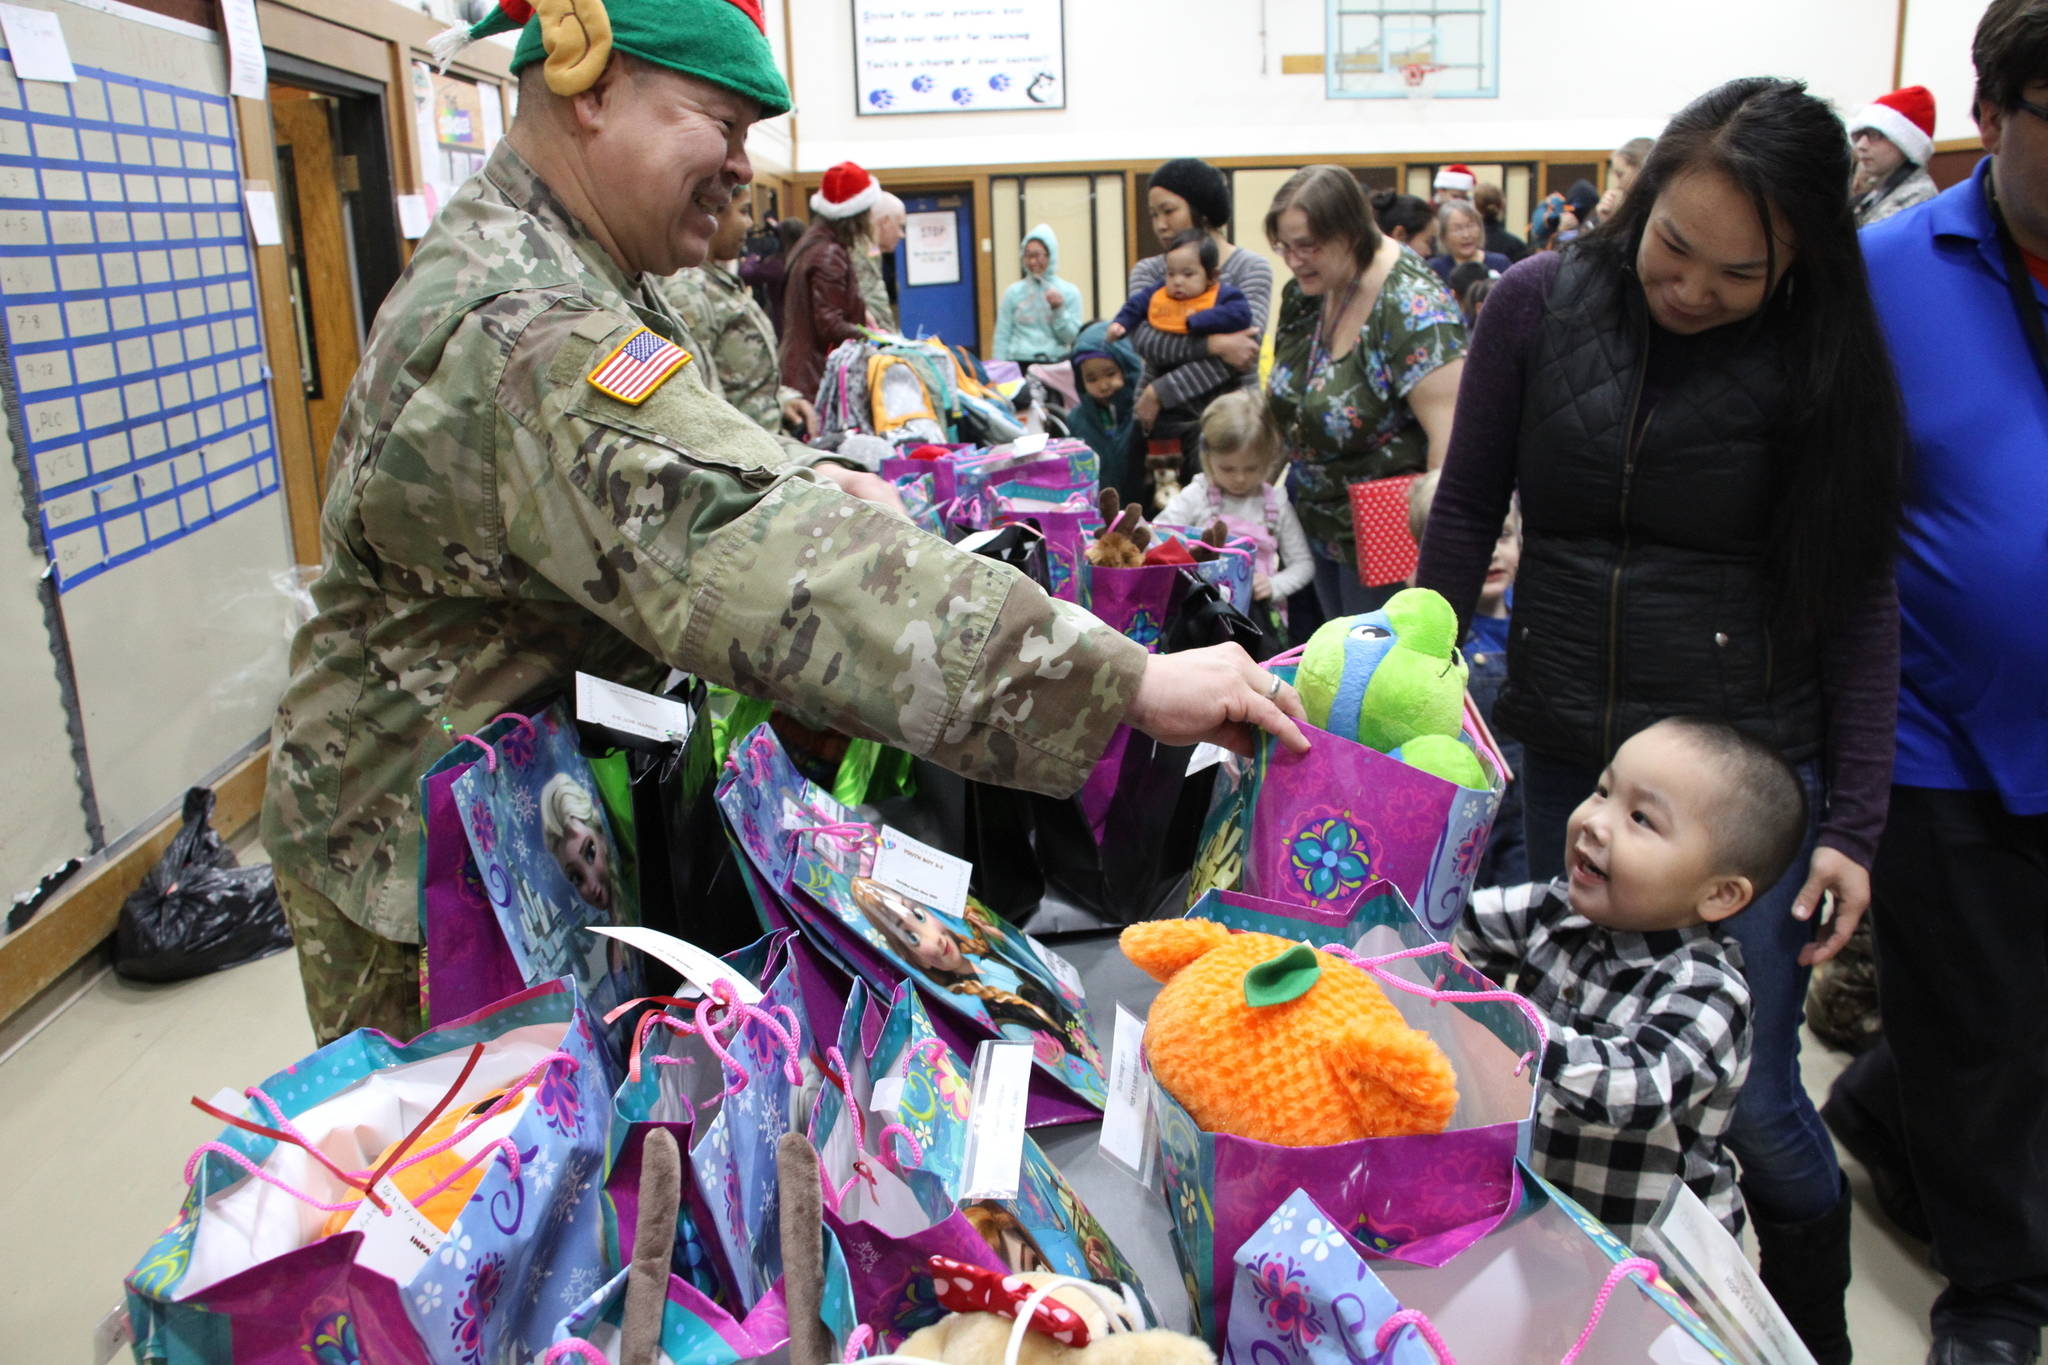 This Dec. 3, 2019, photo shows Alaska National Guard Staff Sgt. Joseph Sallaffie handing a gift bag to Corban Jimmy while Marlene Black looks on during Santa’s visit to Napakiak, Alaska. The Alaska National Guard brought its Operation Santa Claus to the western Alaska community, which is being severely eroded by the nearby Kuskokwim River. (AP Photo/Mark Thiessen)